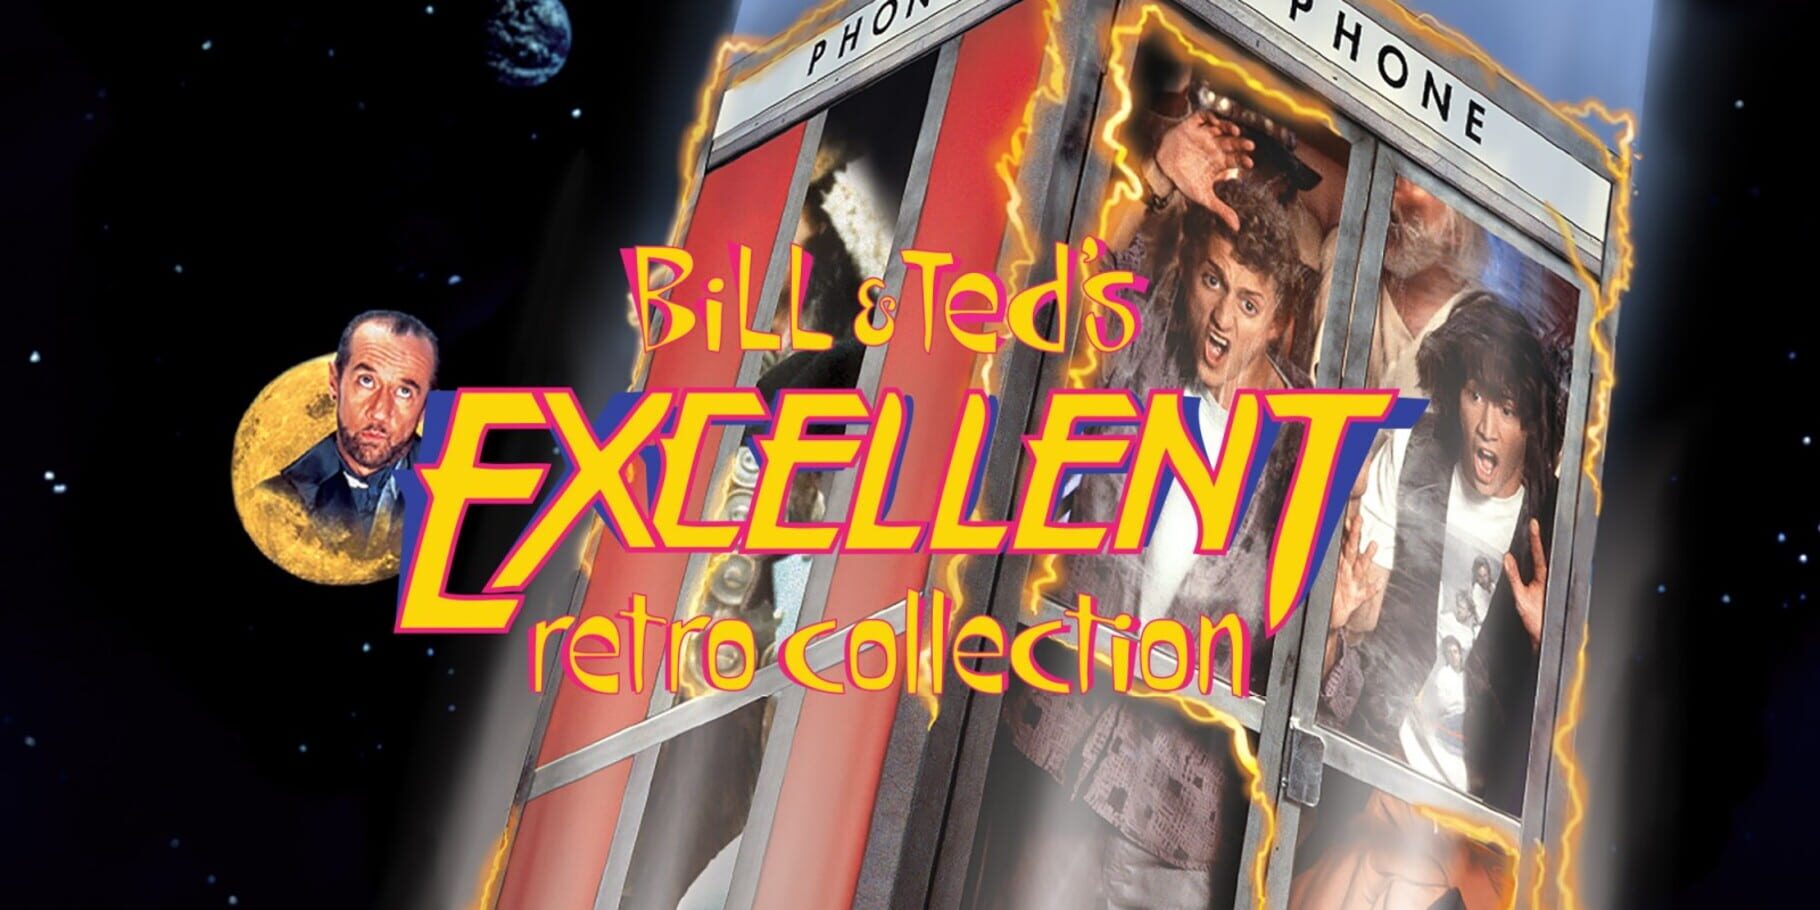 Bill and Ted's Excellent Retro Collection artwork